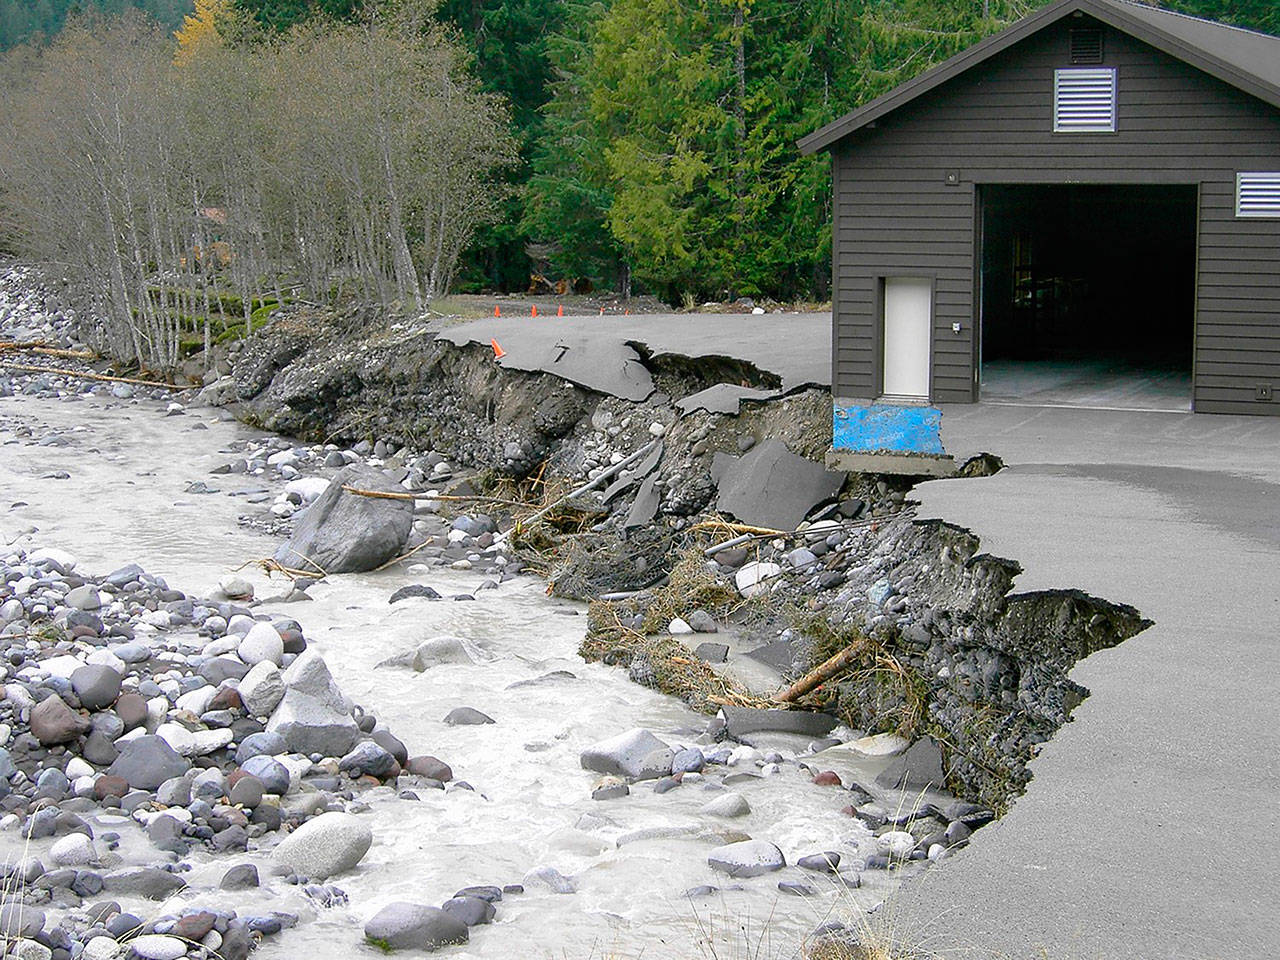 In November 2006, flood damage at Longmire nearly washed the park’s emergency command center into the Nisqually River. Photo courtesy Mount Rainier National Park Archives